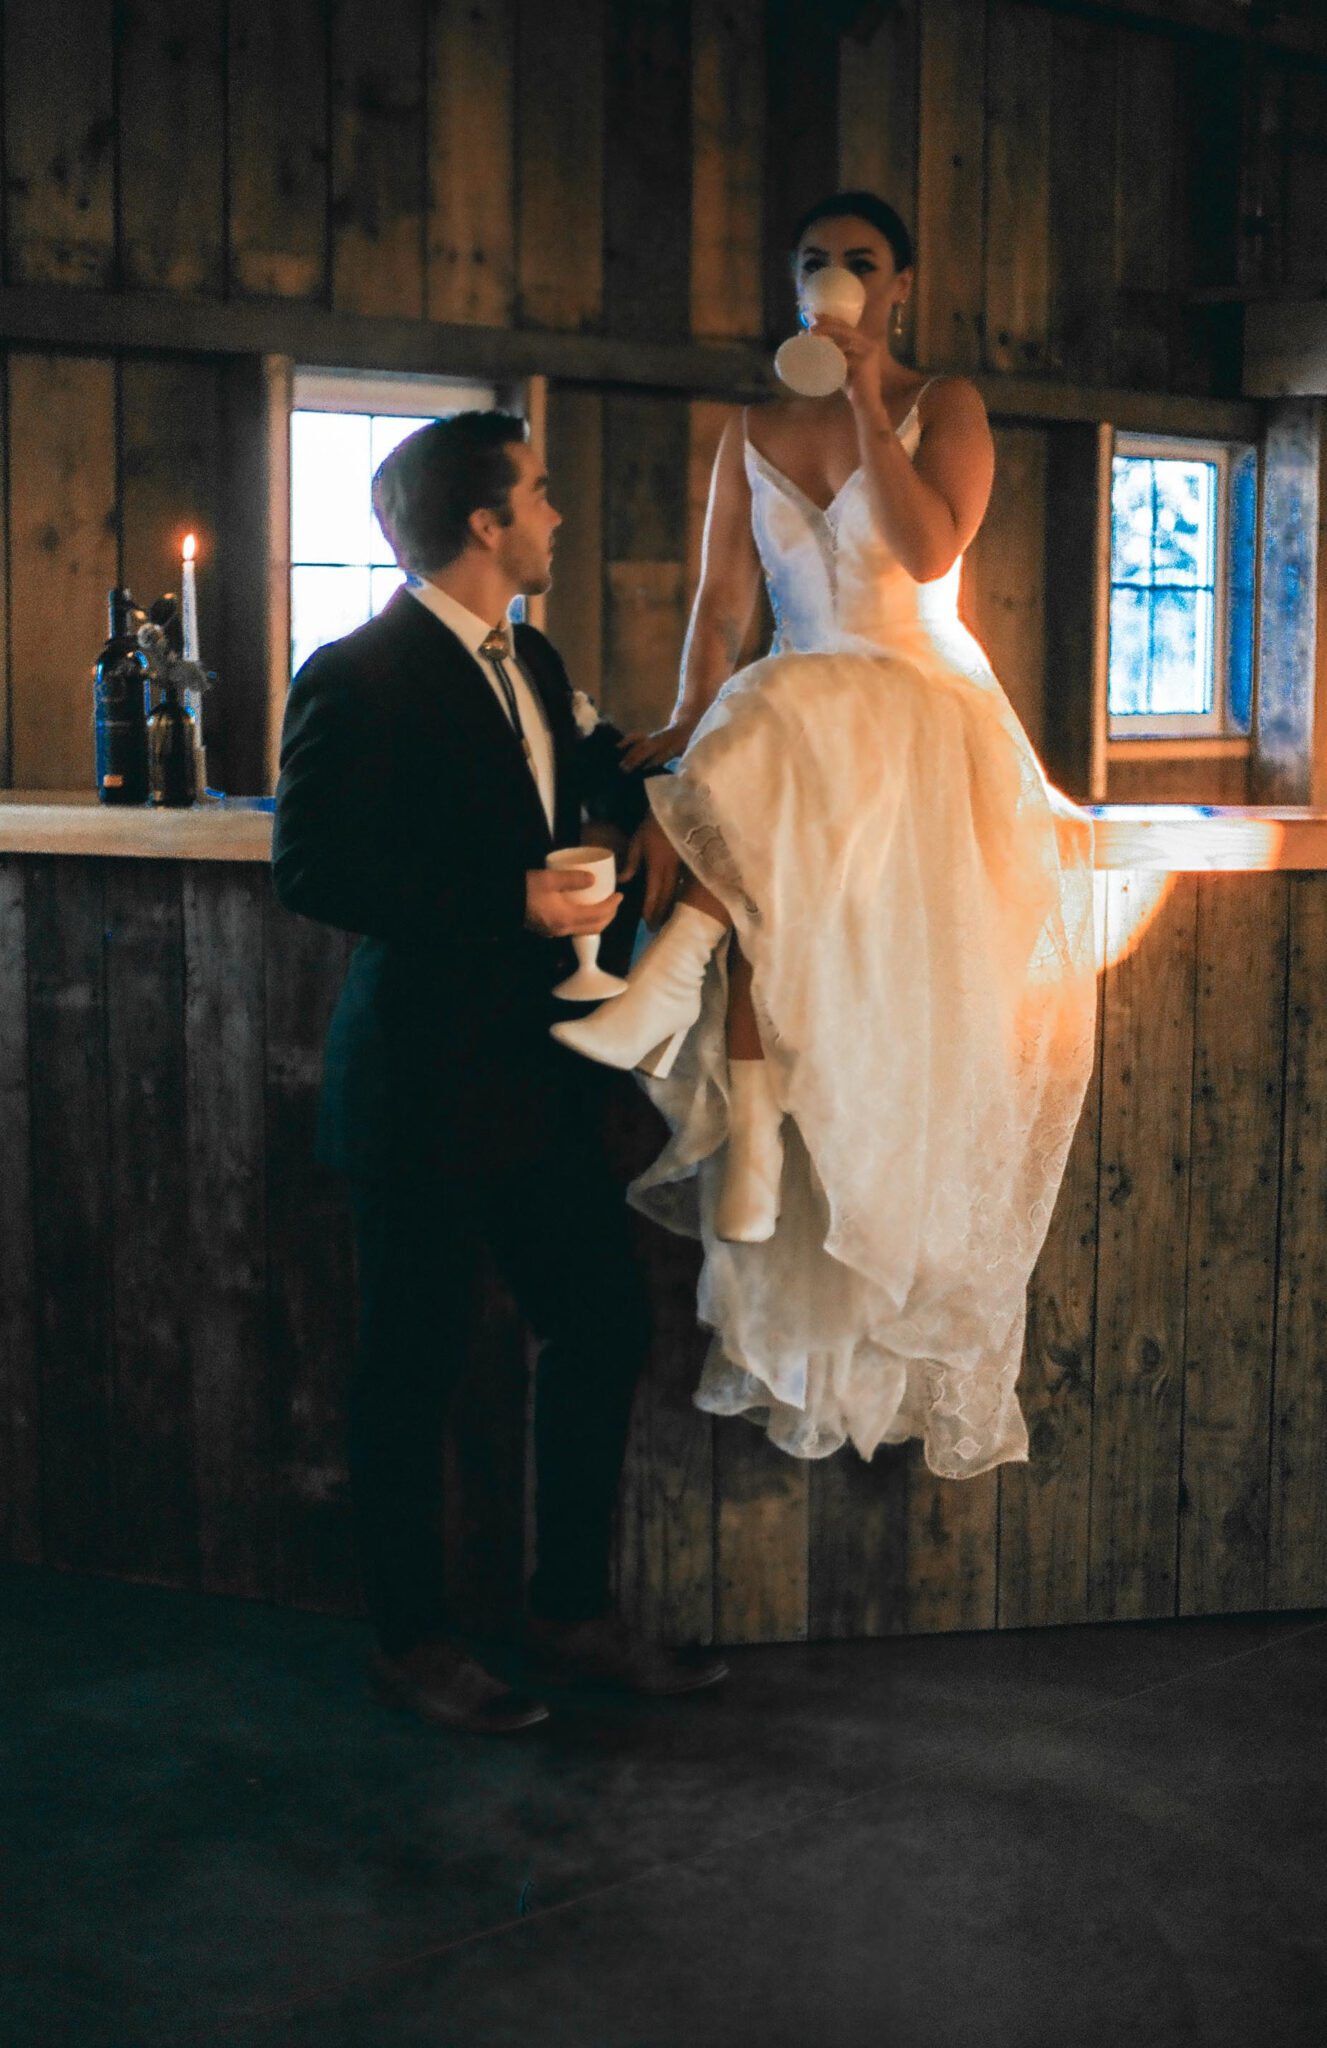 Wedding Inspiration With An Updated Take on Country Chic Wedding Style at Countryside Barn in Lethbridge Alberta, warm romantic wedding photography of bride and groom, vintage wedding attire, bride and groom at wedding bar